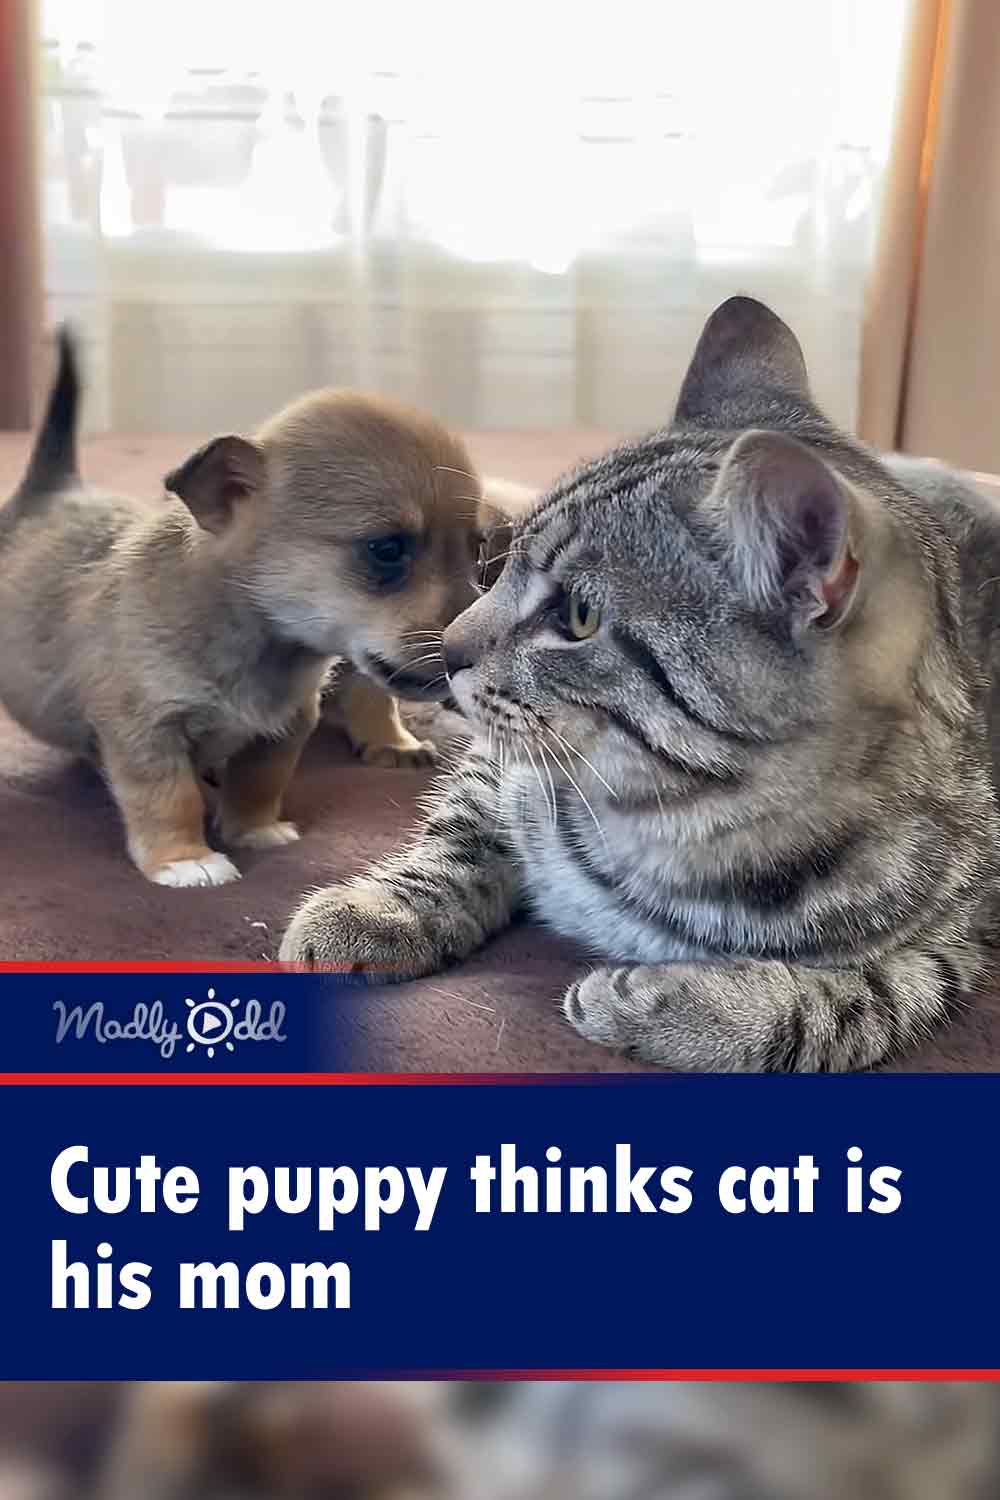 Cute puppy thinks cat is his mom